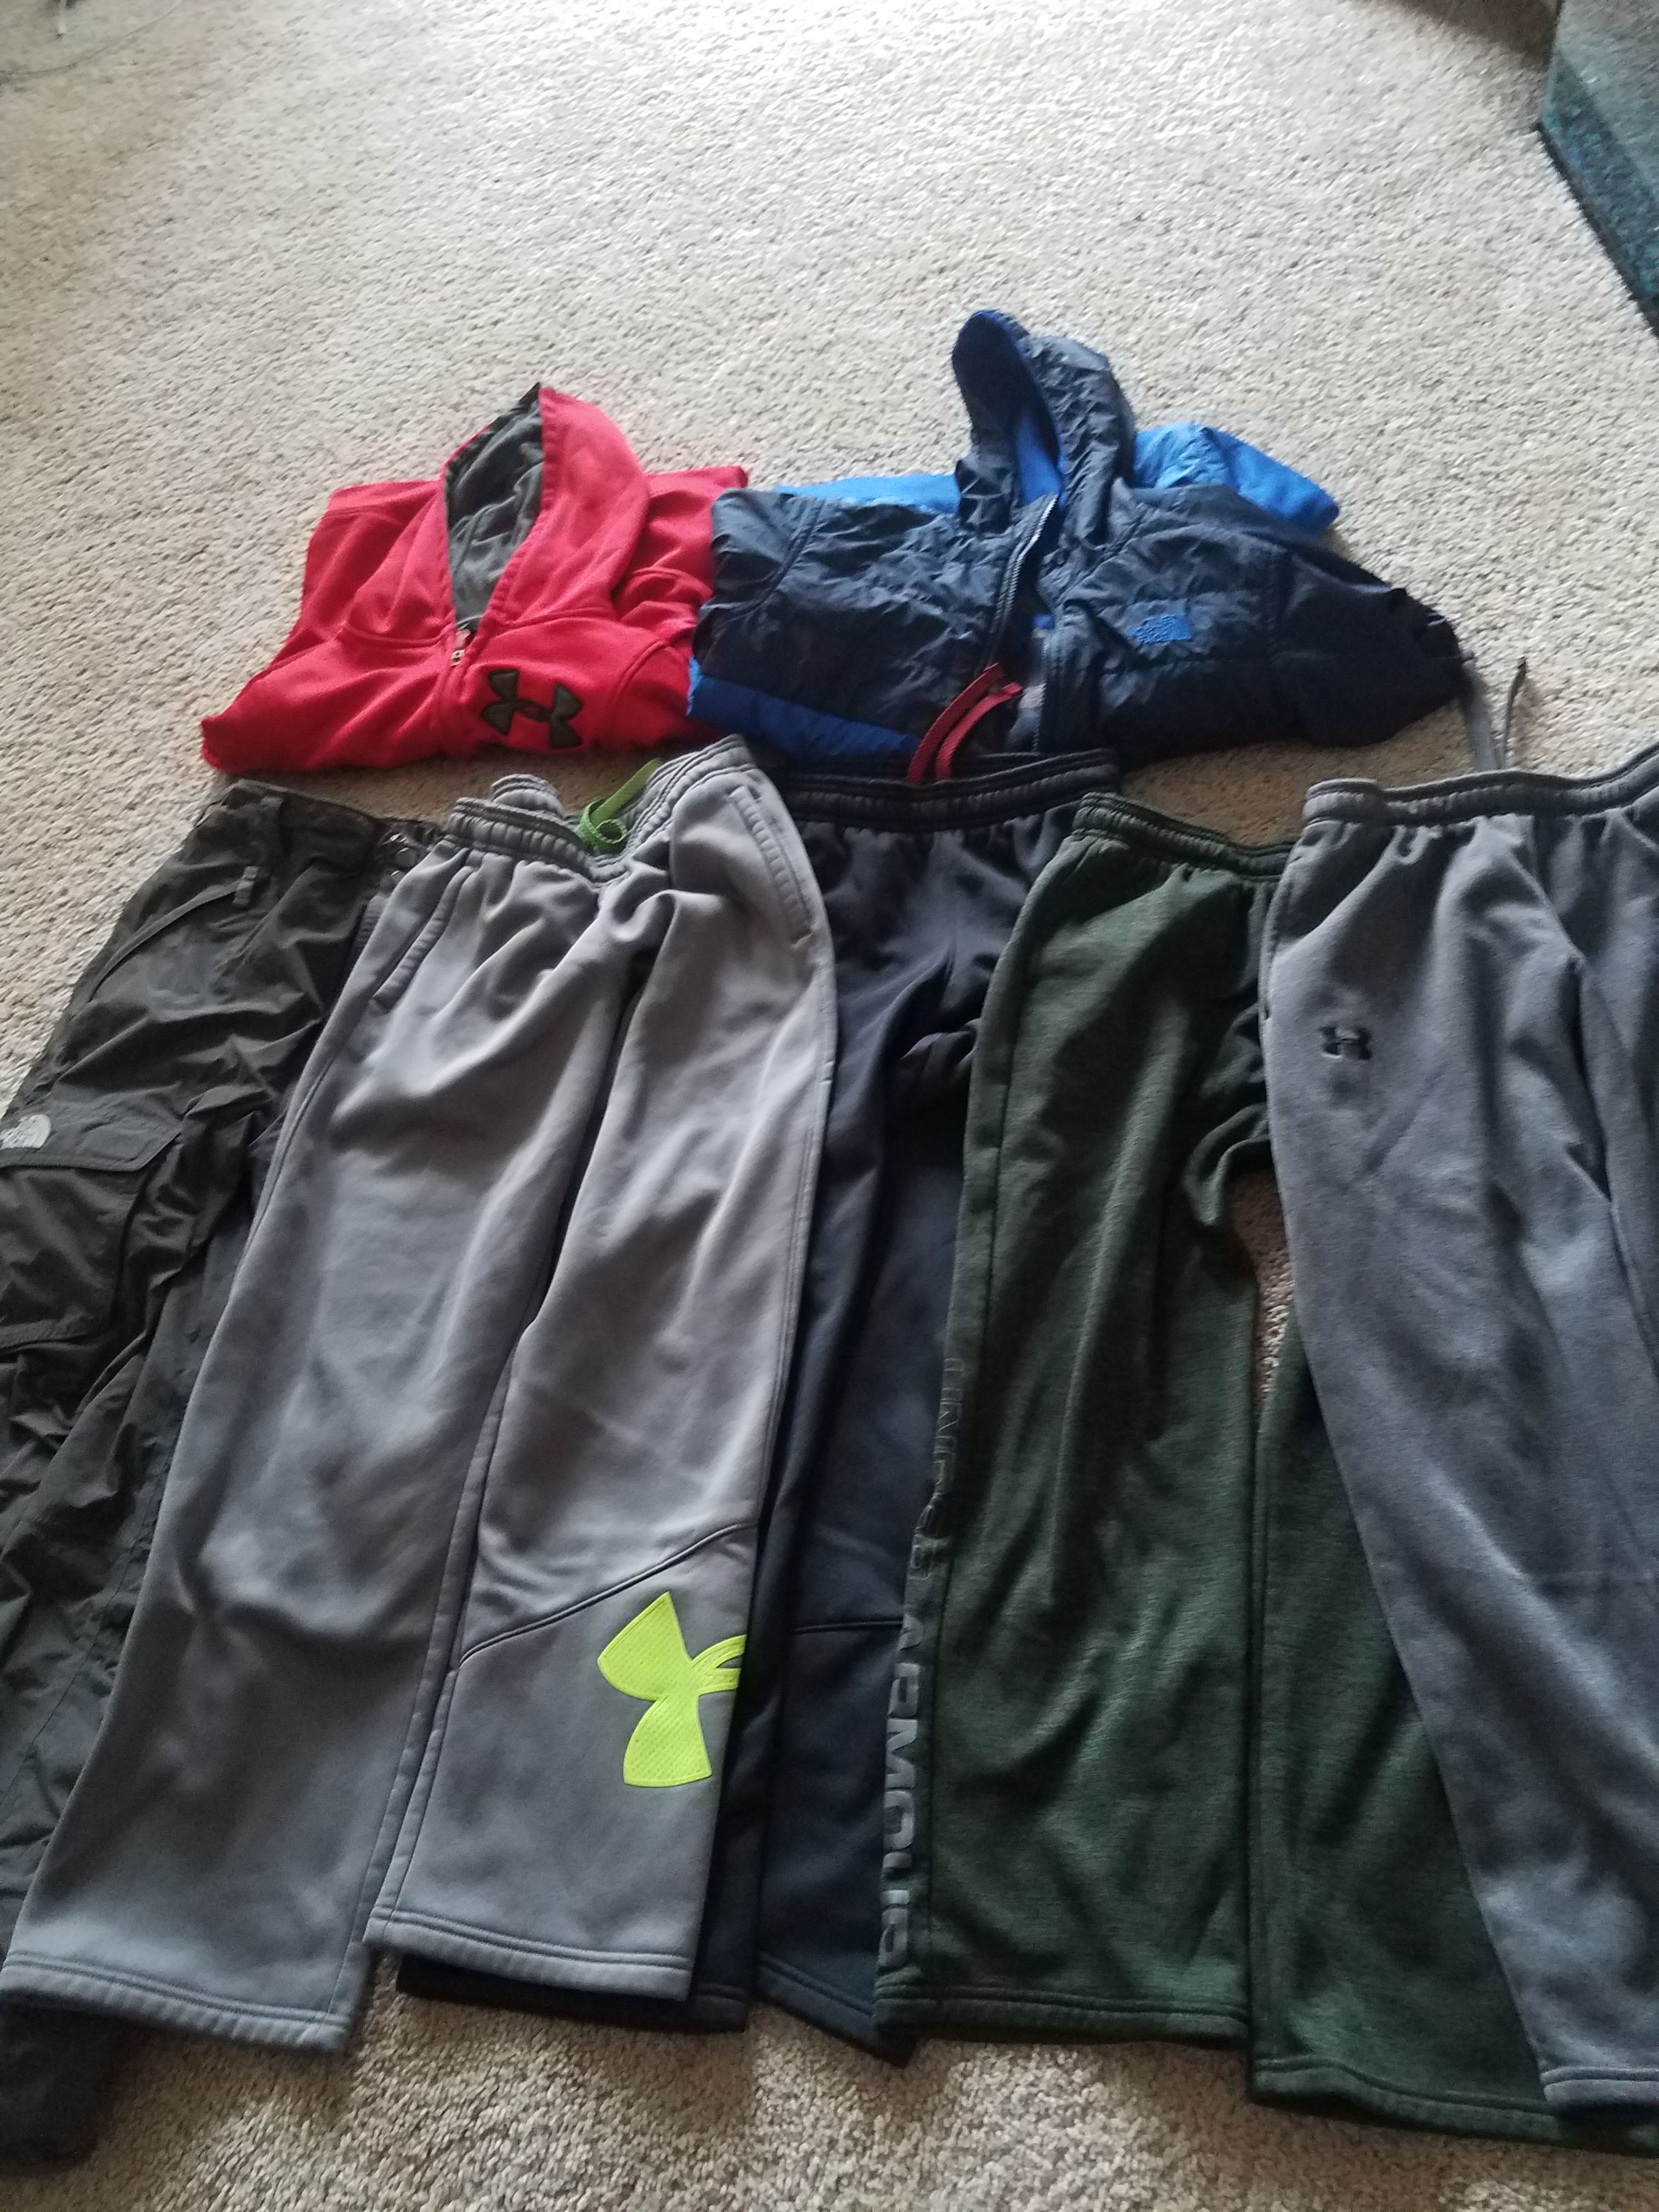 pants underarmour for boys YL ,YM 5 pants and 2 hoodies